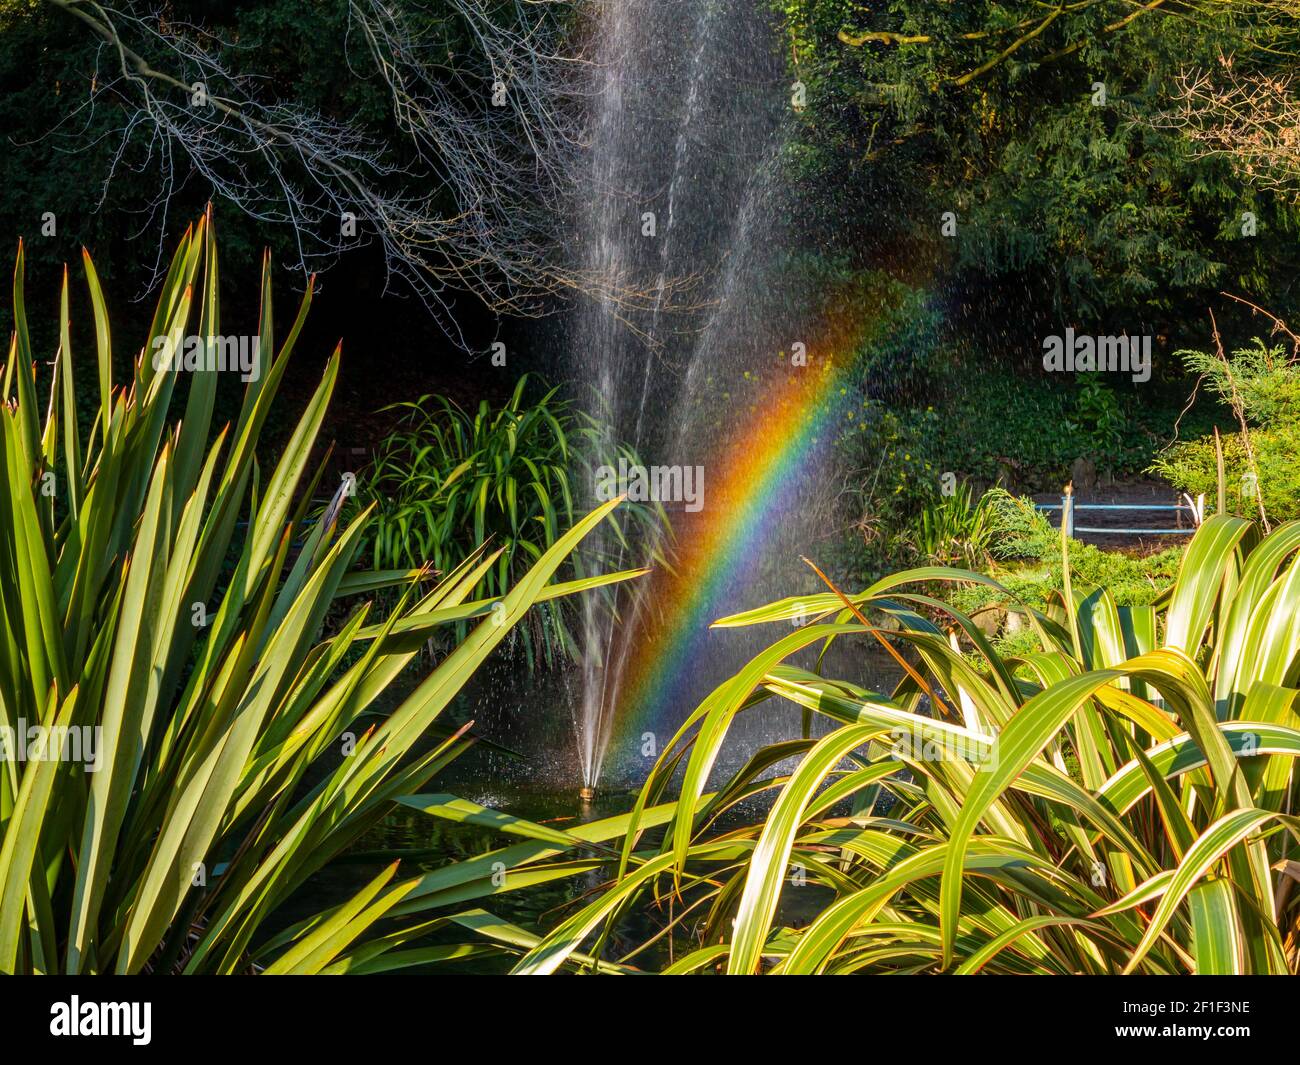 Rainbow caused by refraction of water droplets from an ornamental fountain in Derwent Gardens Matlock Bath Derbyshire Peak District England UK Stock Photo